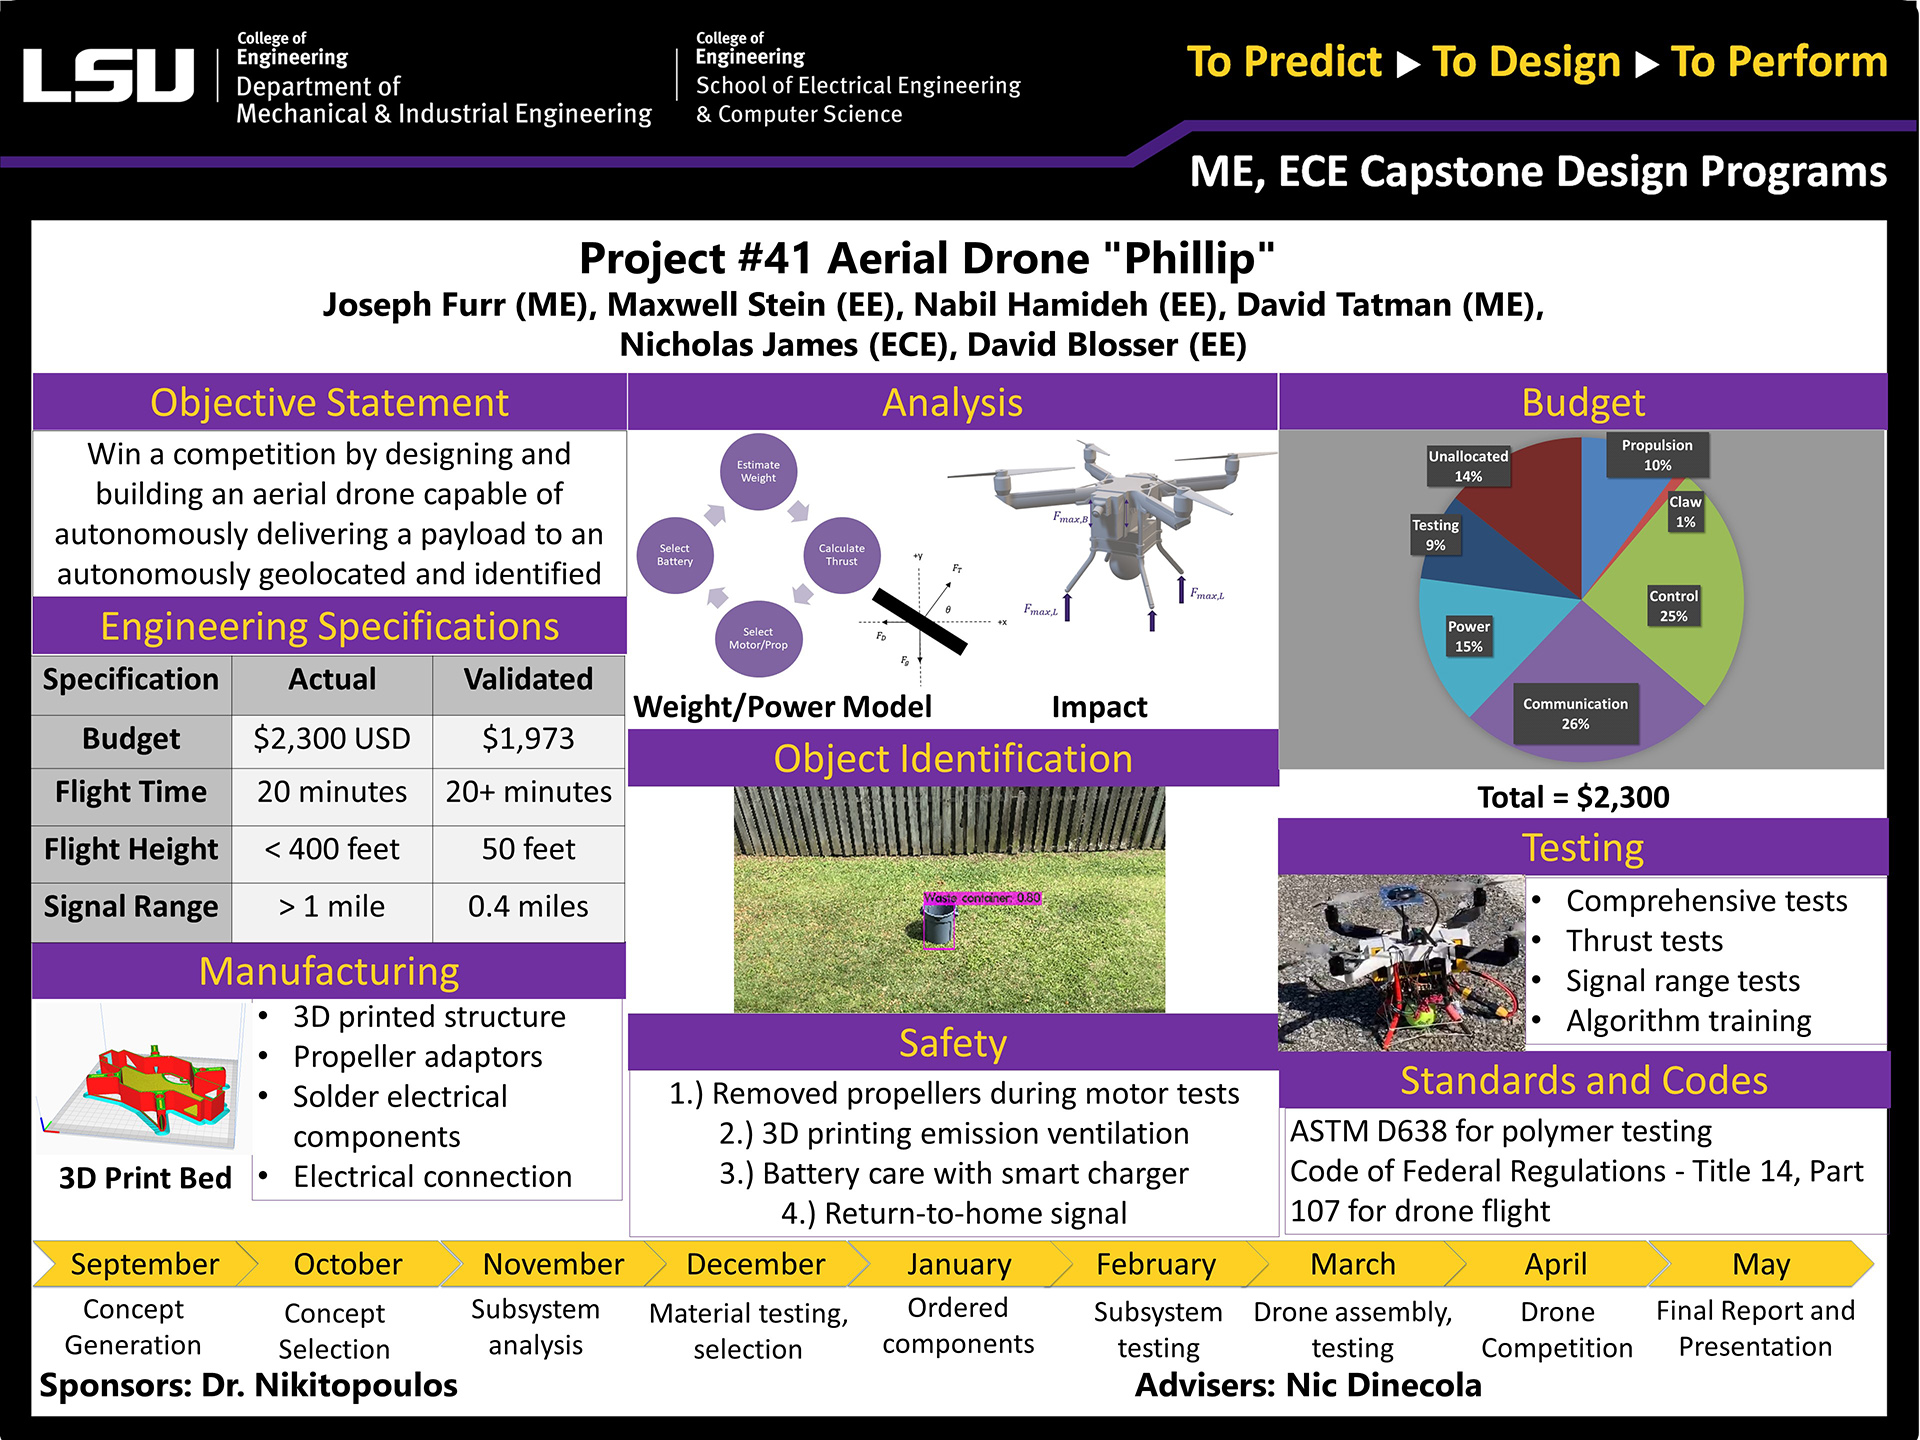 Project 41: Aerial Drone "Phillip"